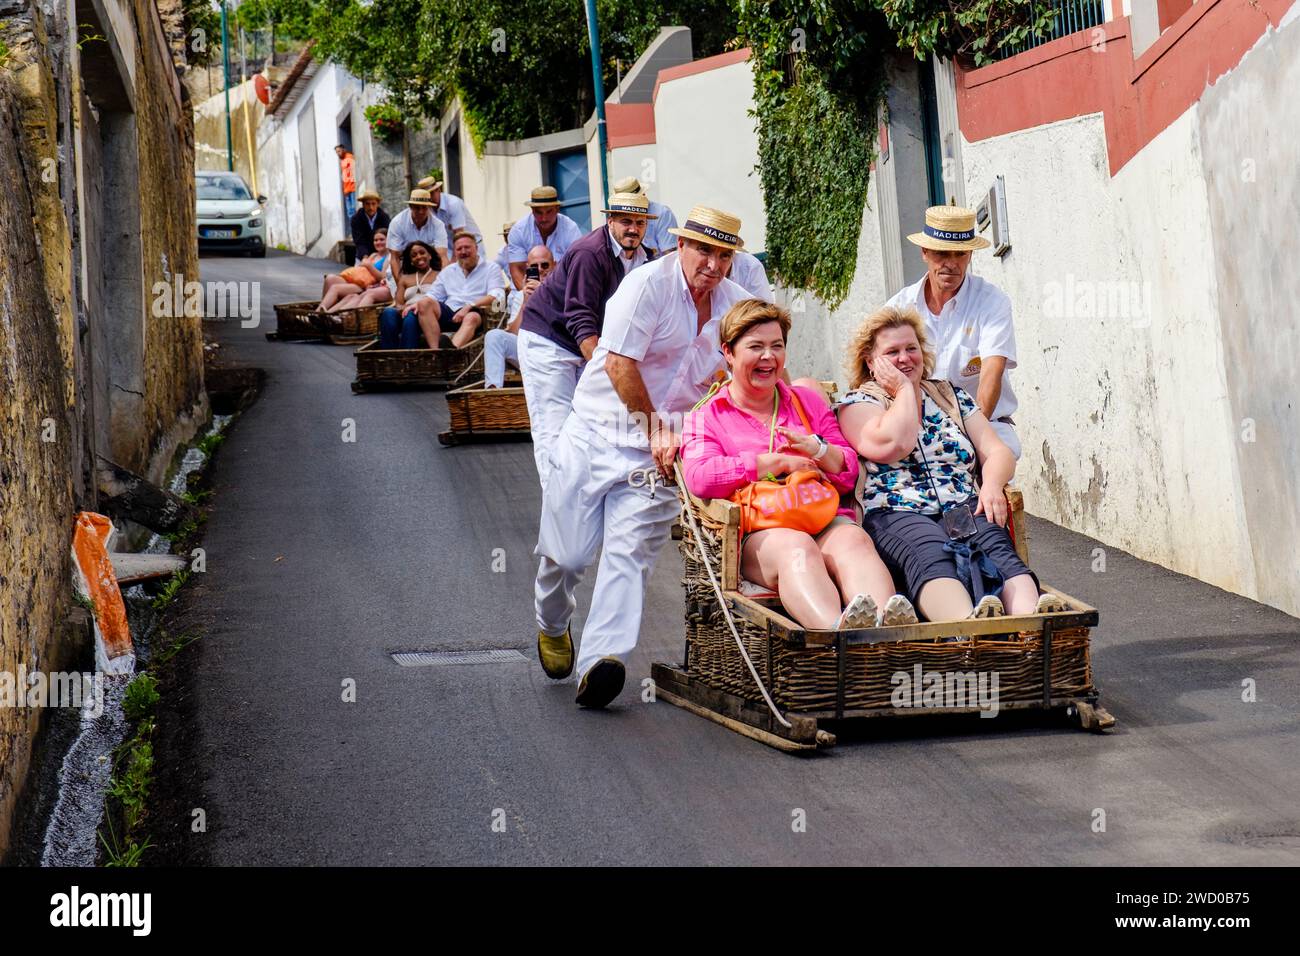 Tourists pushed downhill by carreiros, carros de cesto, basket carts, Monte toboggan ride, wicker basket carts mounted on skids, Funchal, Madeira Stock Photo